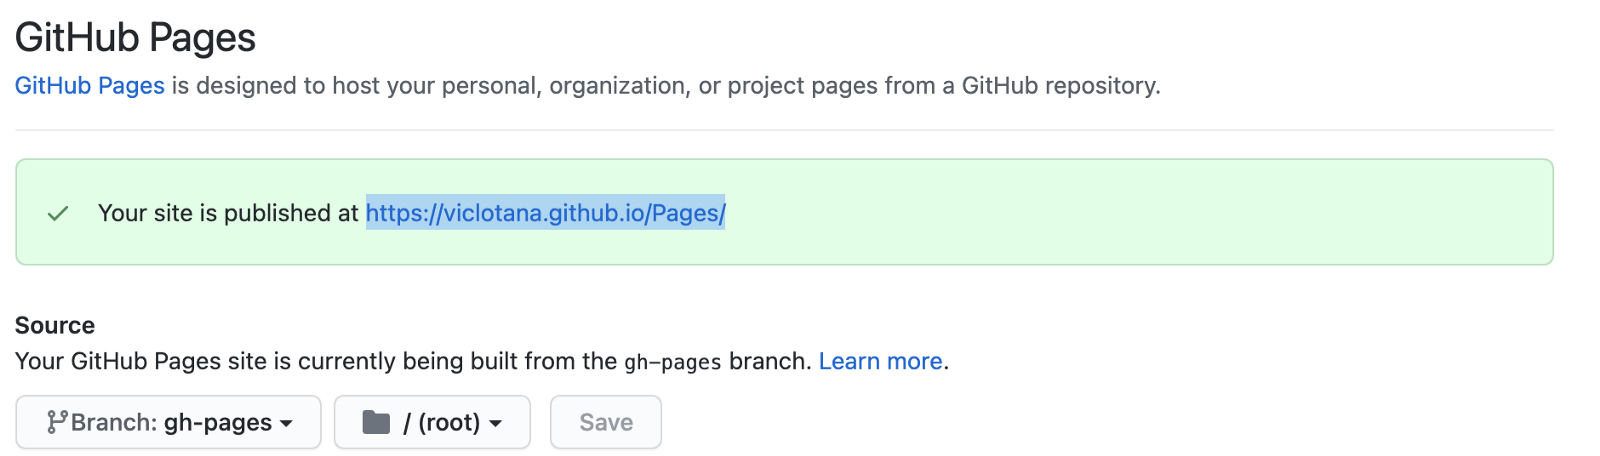 GitHub Pages - your site is published at, and the URL.